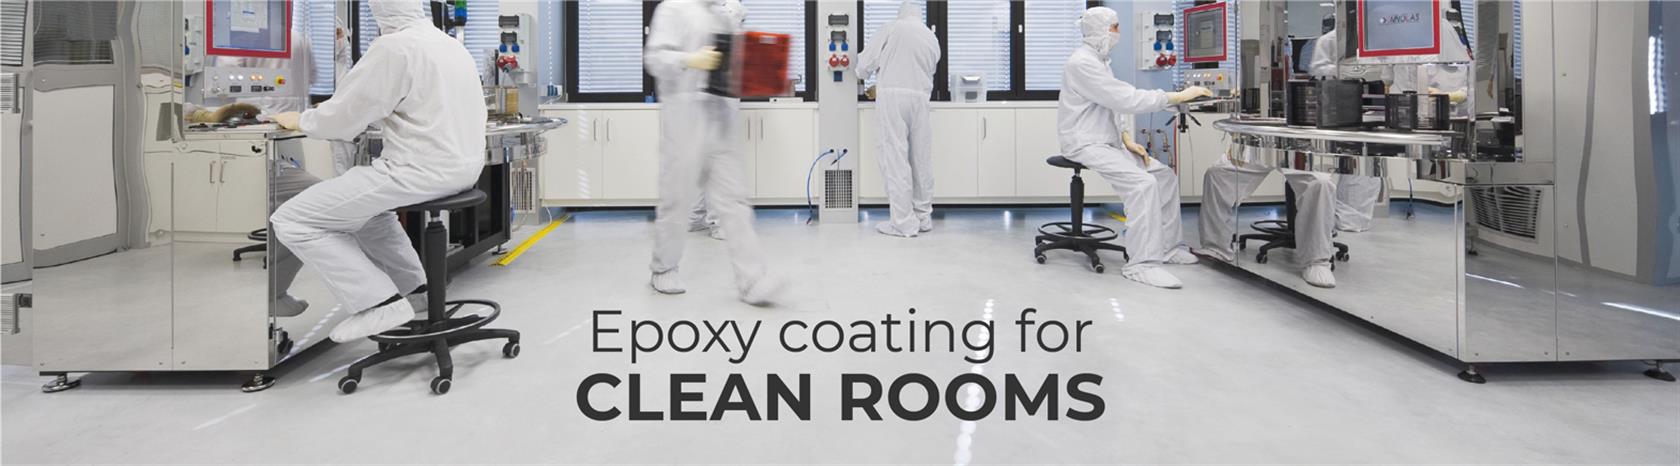 Epoxy flooring for industrial environments